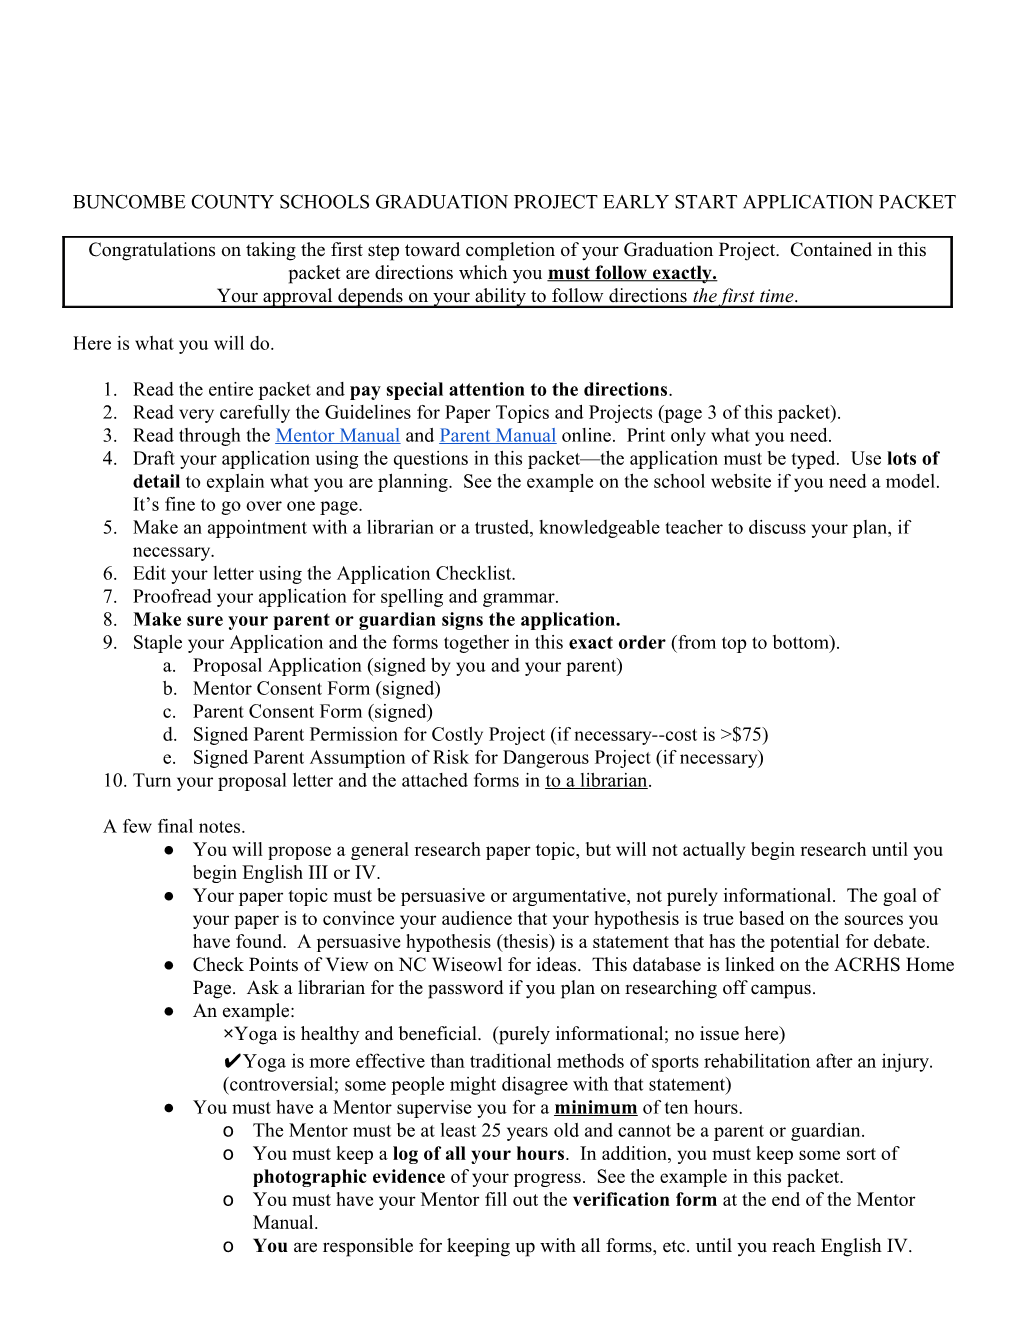 Buncombe County Schools Graduation Project Early Start Application Packet